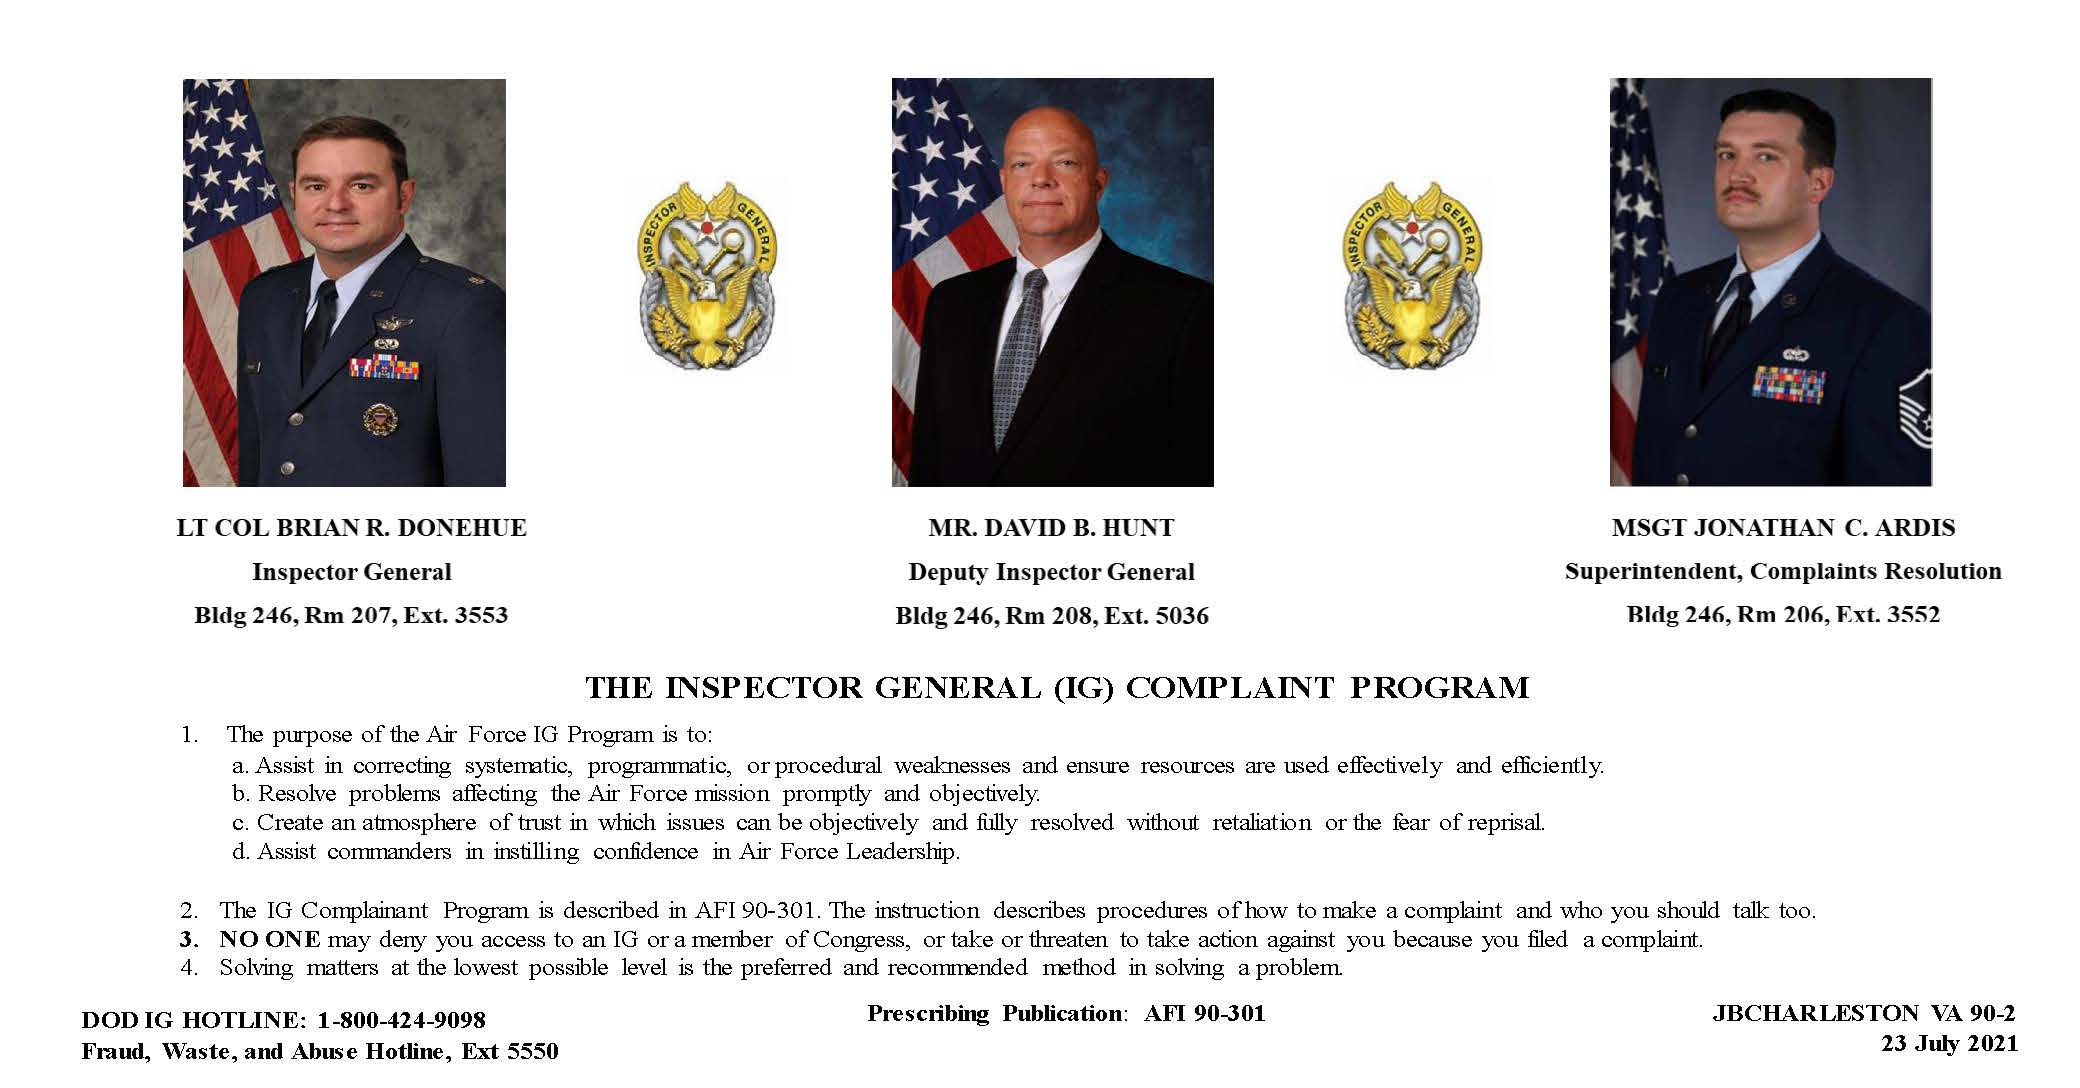 A poster for the Inspector General Complaint Program